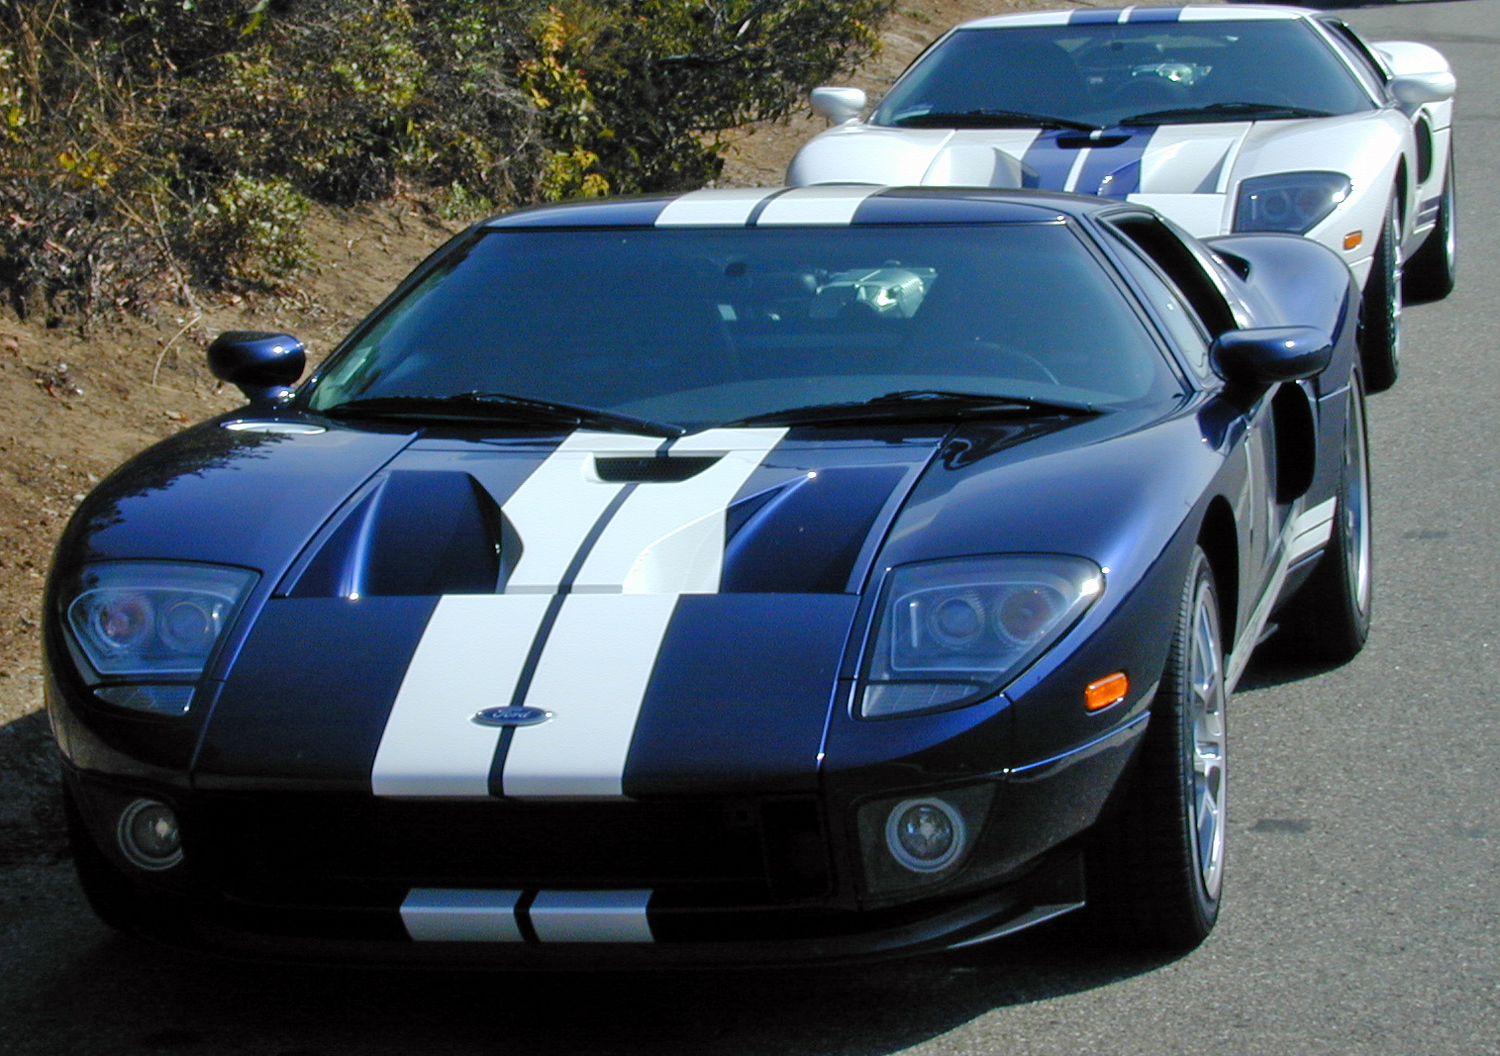 2005 Ford GT Pacific Coast Highway